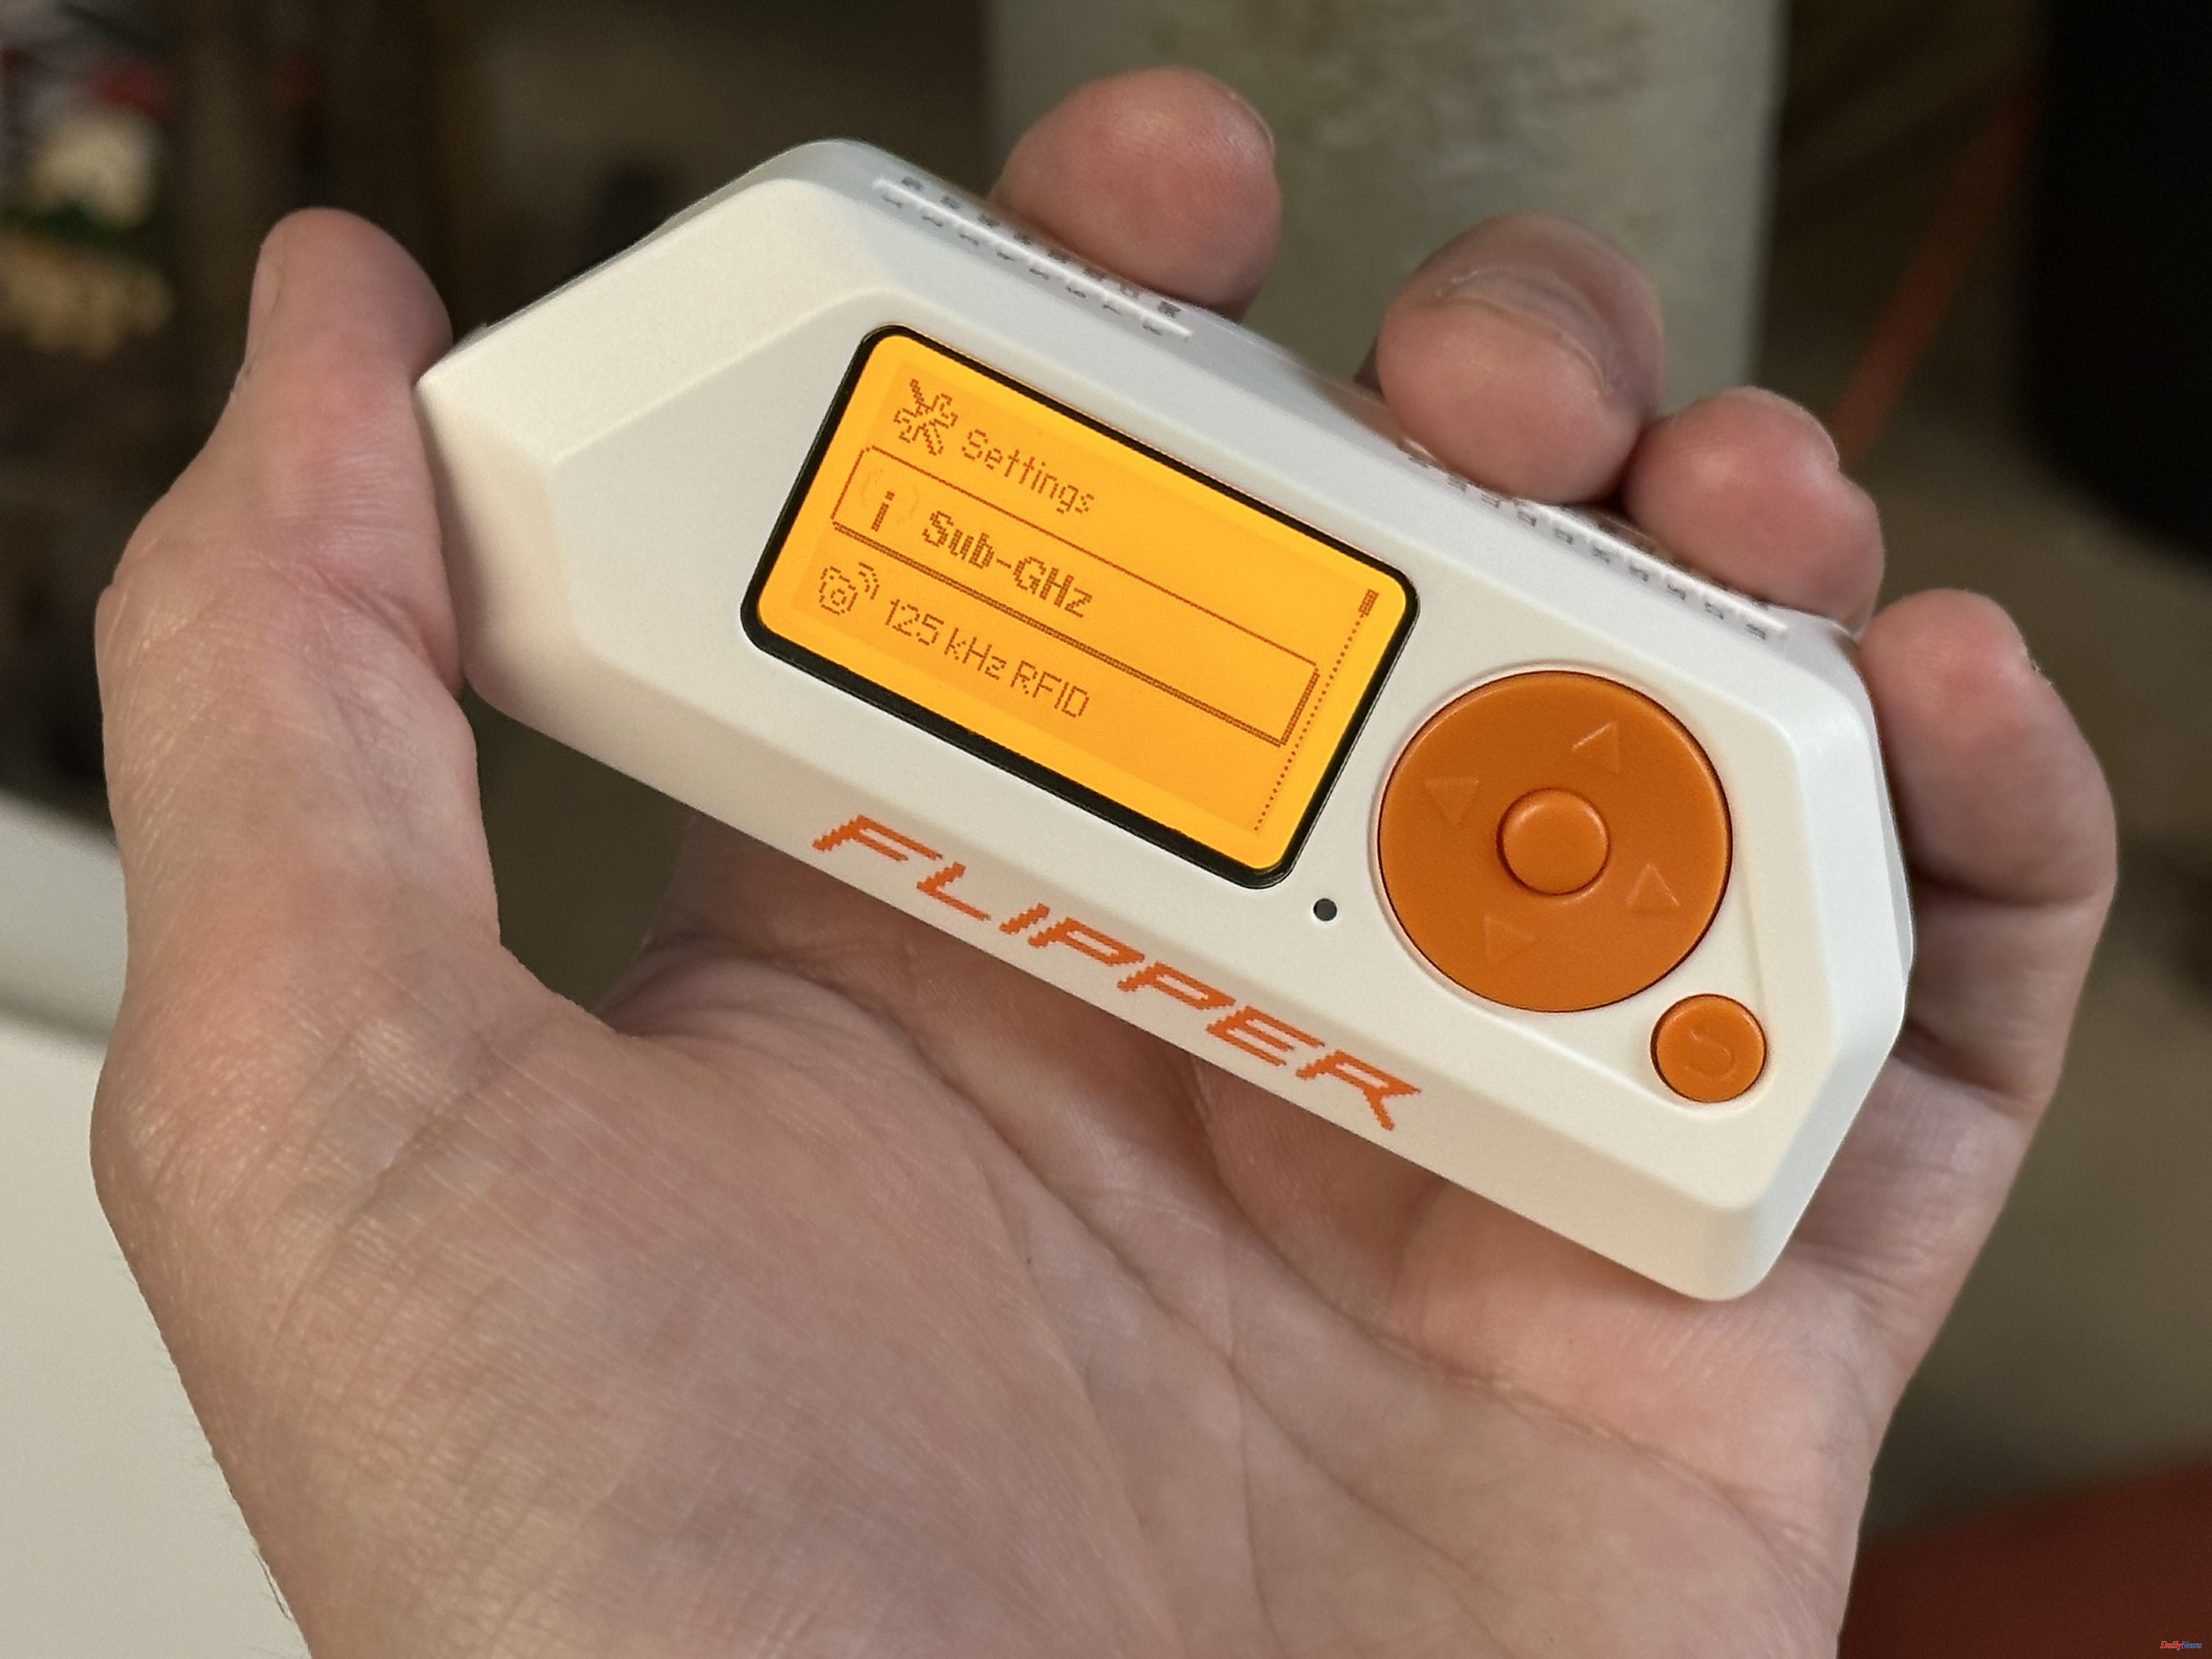 Technology We have tested the Flipper Zero, the hacker toy that Amazon has banned